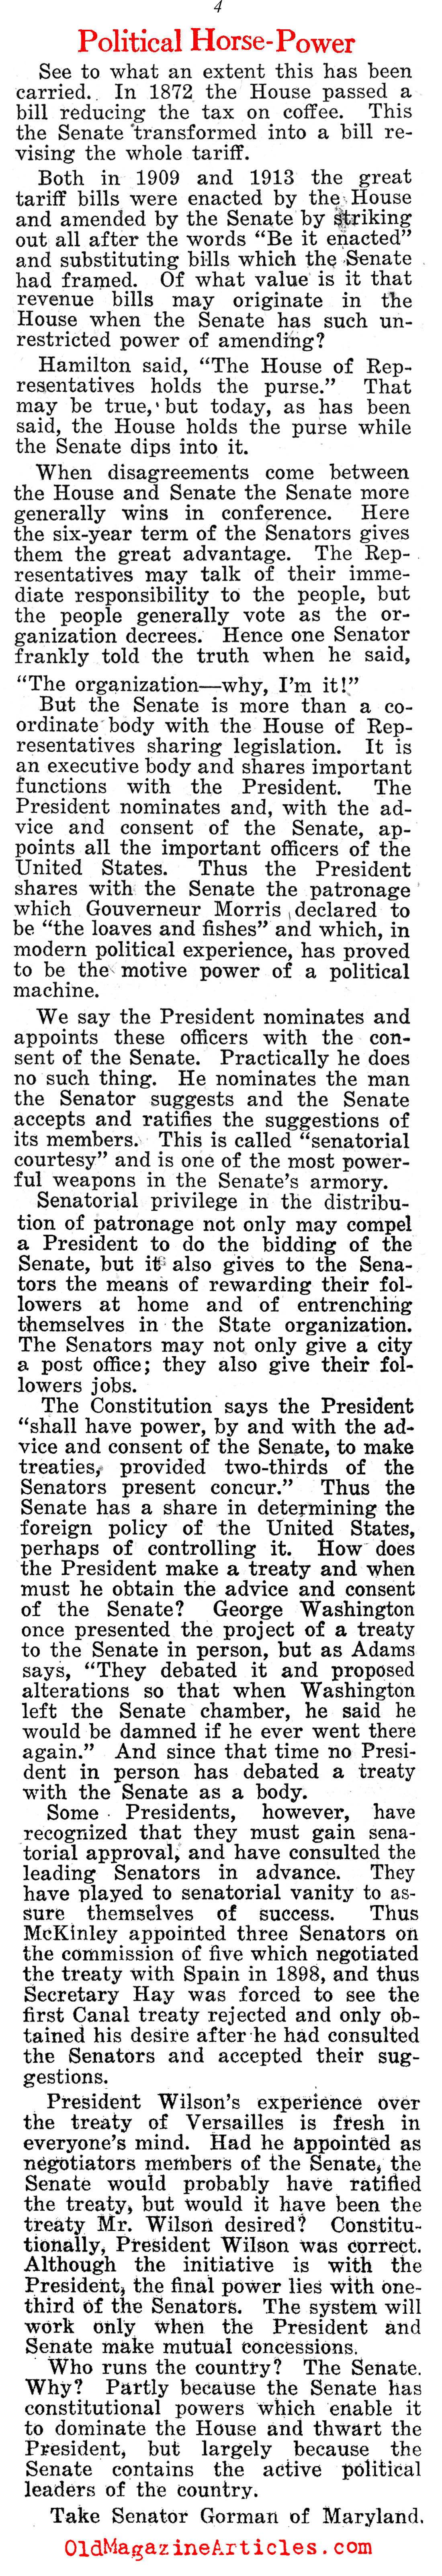 The Popularly-Elected Senate (American Legion Weekly, 1920)